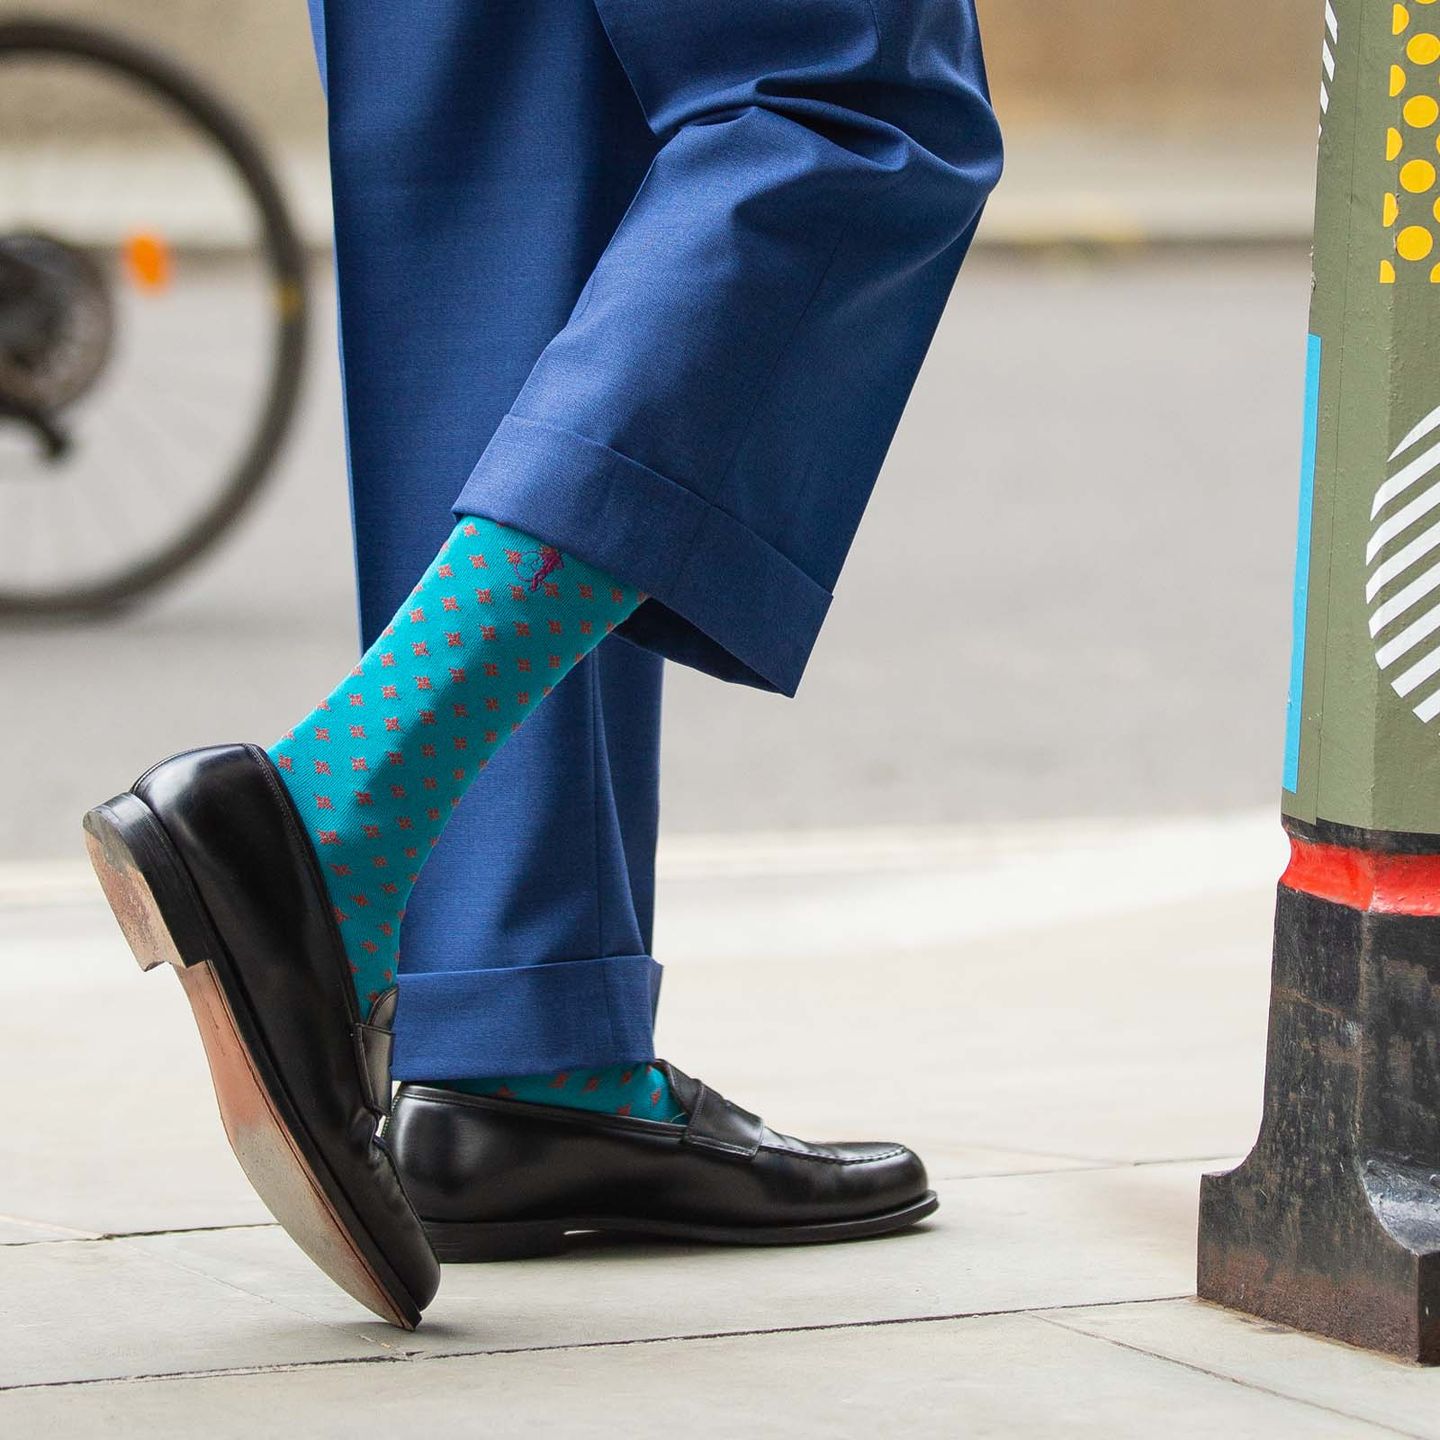 A close up of a person wearing blue and red patterned socks